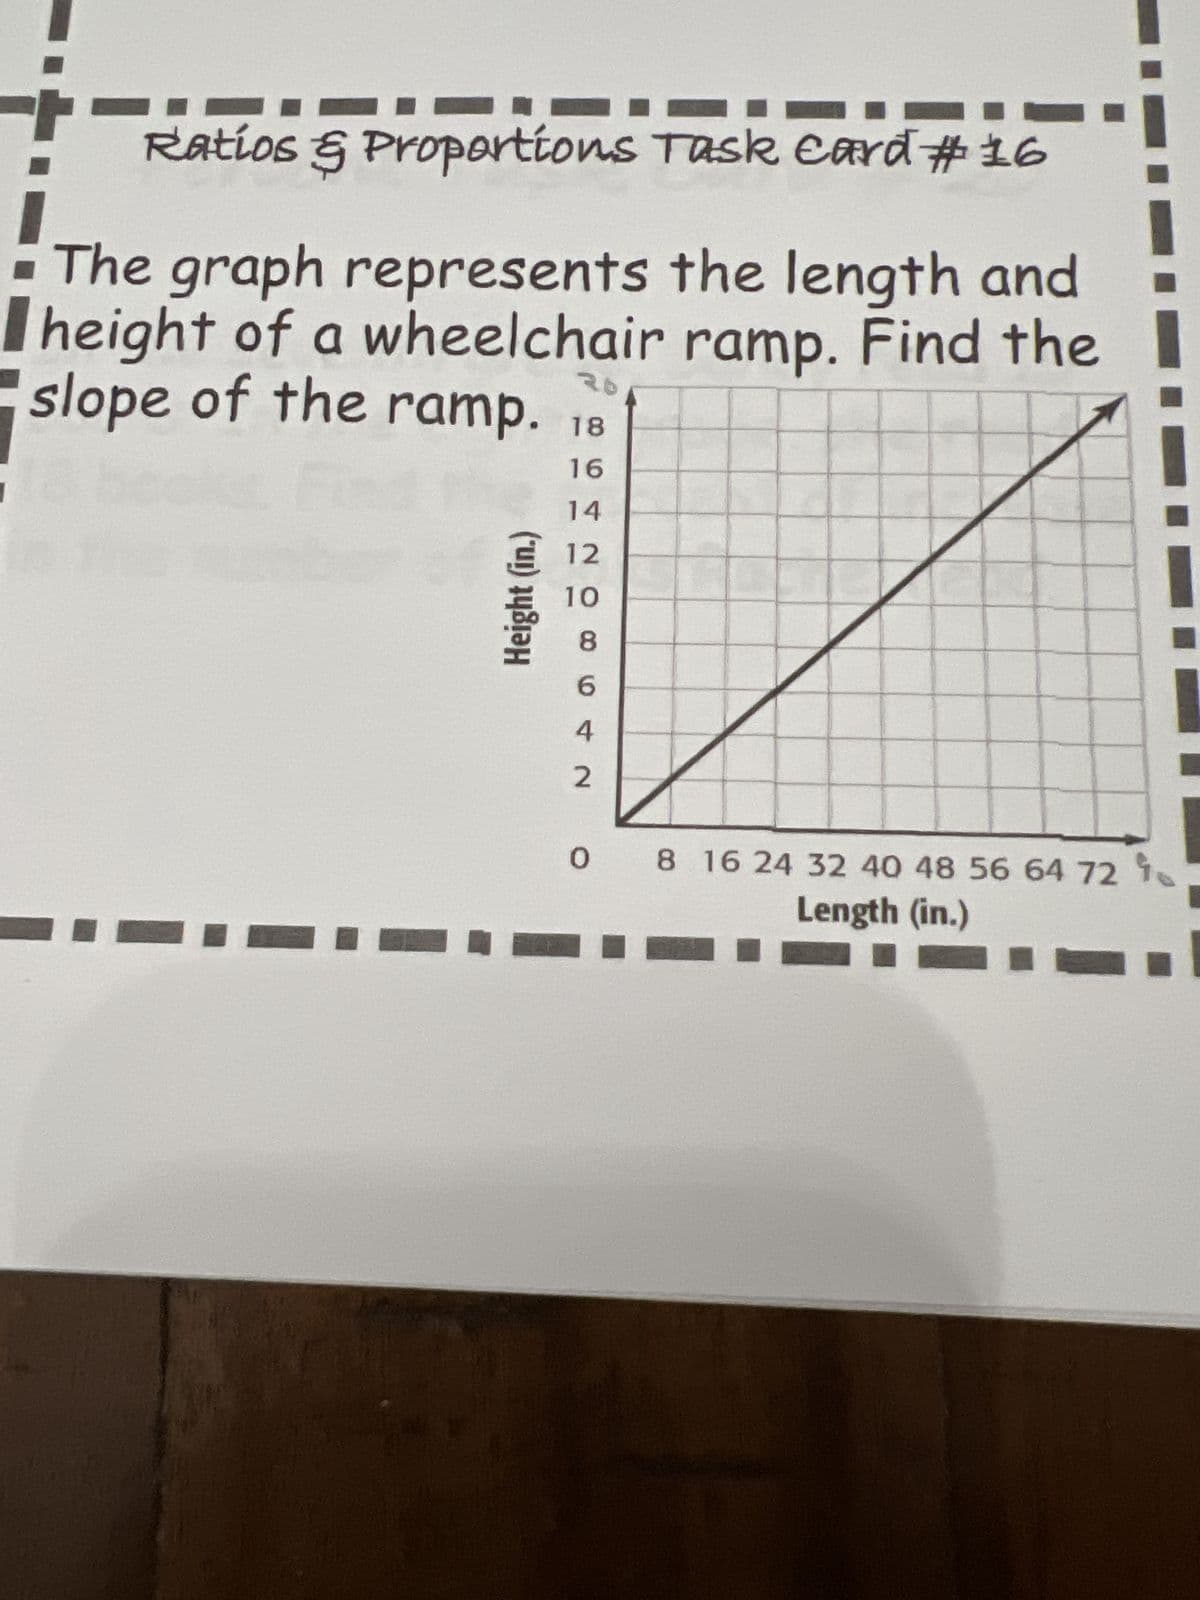 Ratios & Proportions Task Card #16
The graph represents the length and
height of a wheelchair ramp. Find the
slope of the ramp. 18
Height (in.)
26
16
14
12
10
10
8
6
4
2
0 8 16 24 32 40 48 56 64 72 1
Length (in.)